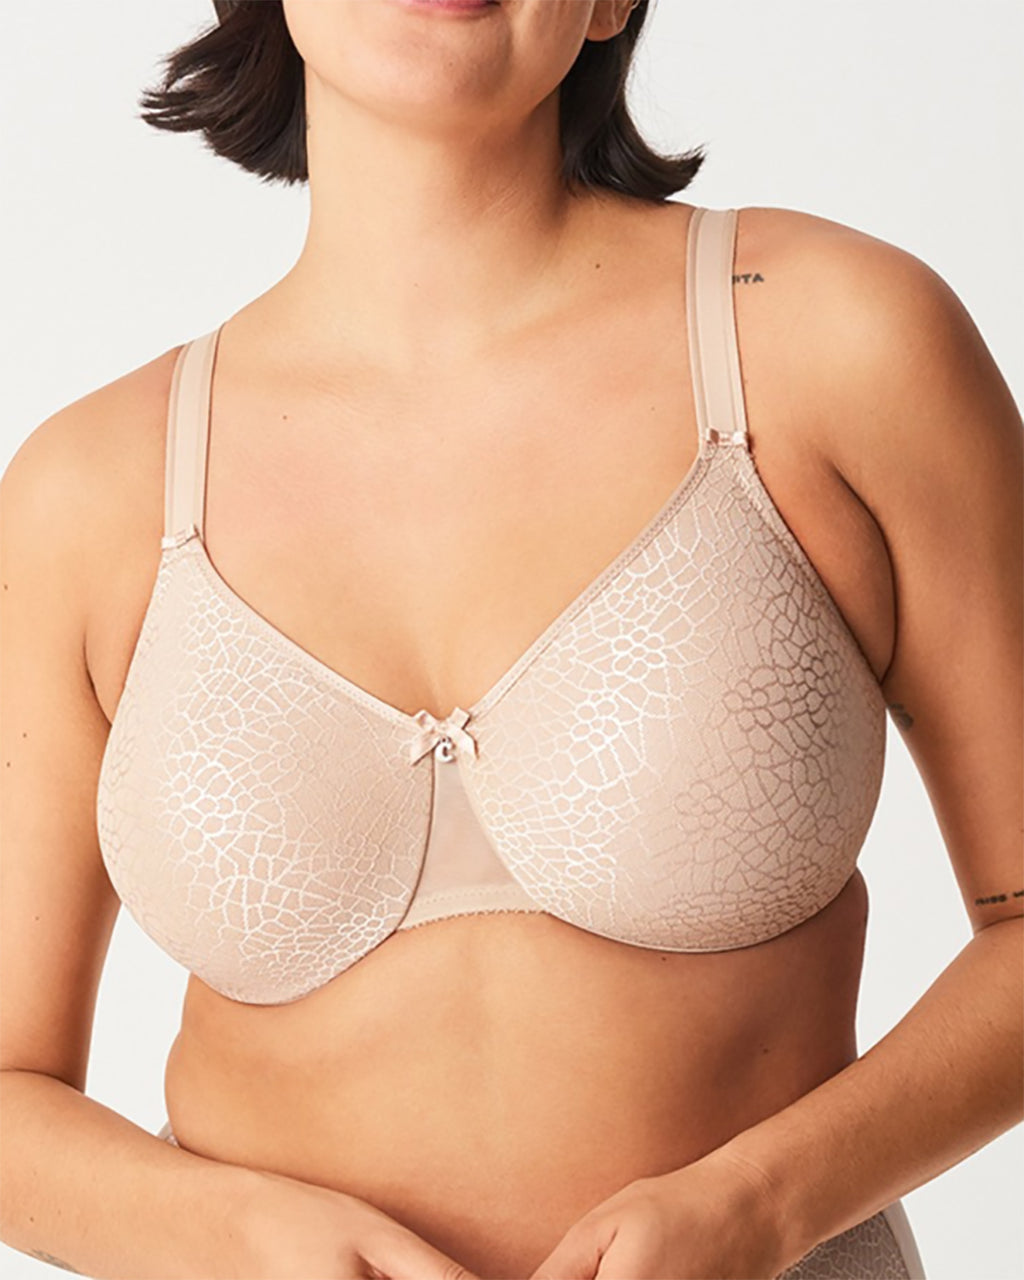 New Chantelle 2792 C Magnifique Full Bust Wirefree Nude Bra Size